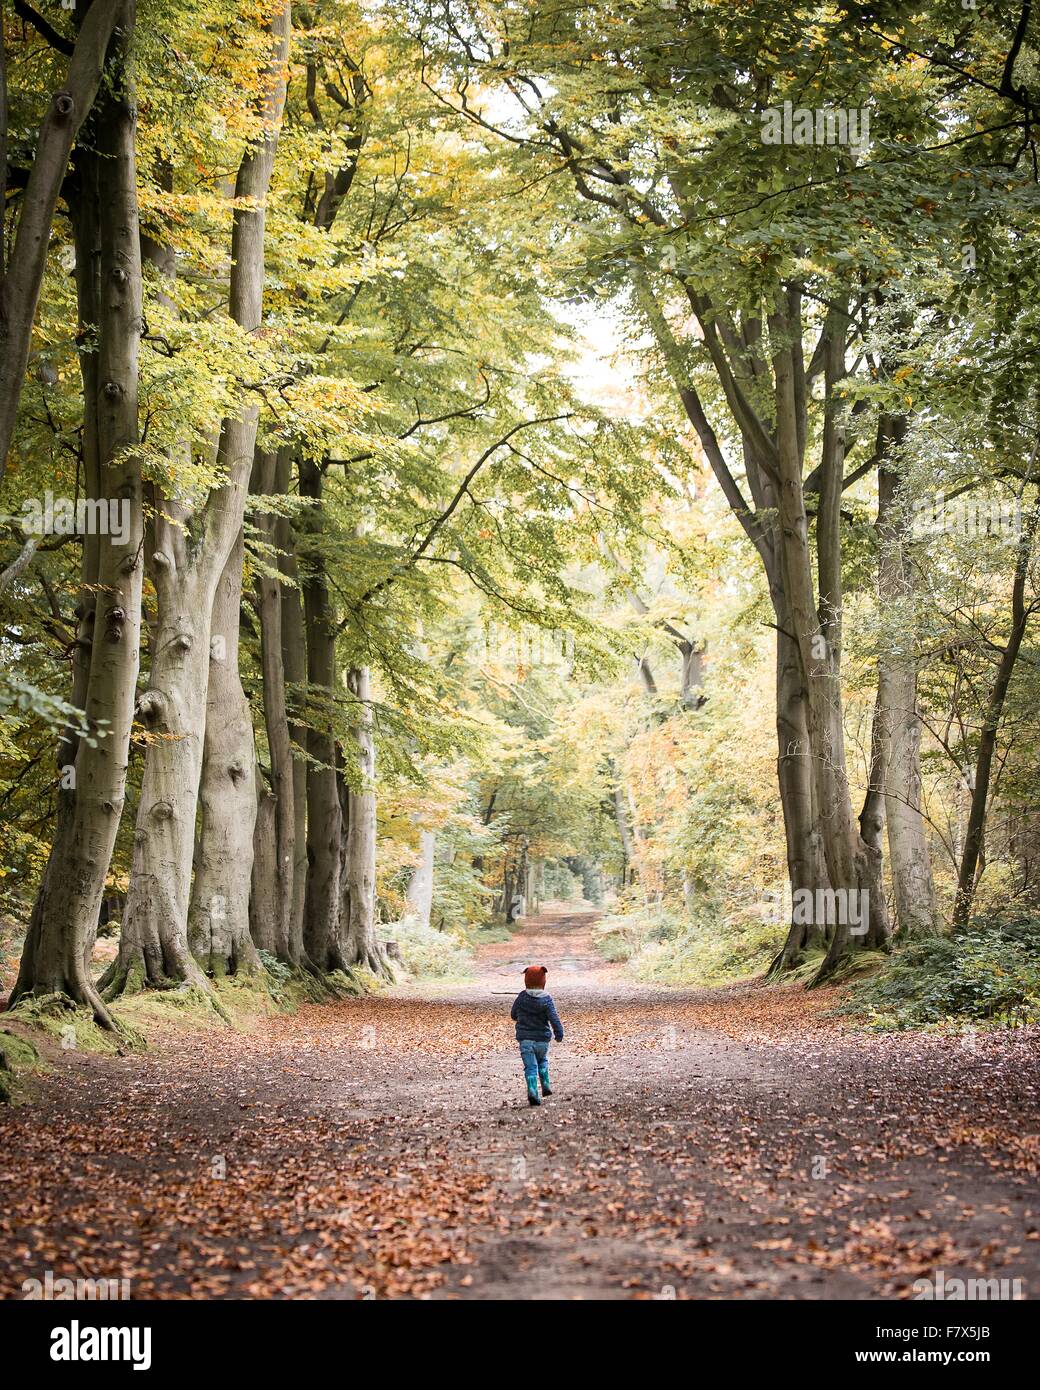 Boy walking through forest Banque D'Images